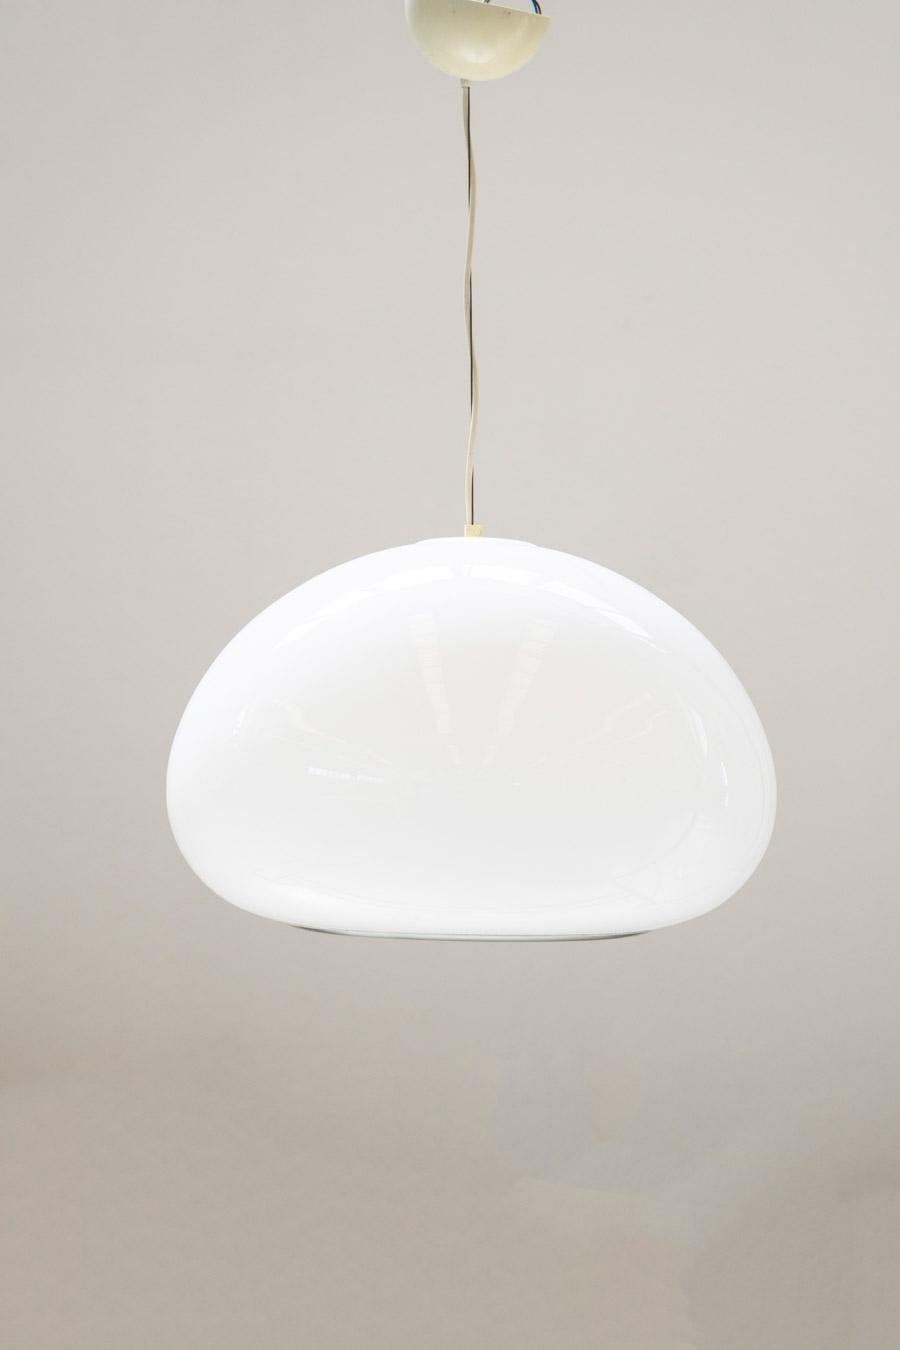 TITLE Black and white ceiling lamp  by Pier James and Achilles 					Castiglioni for Flos, 1965			
DESCRIPTION Made of white opal glass with lighting under and inside the glass. 	Designed by Pier Giacomo and Achille Castiglioni for